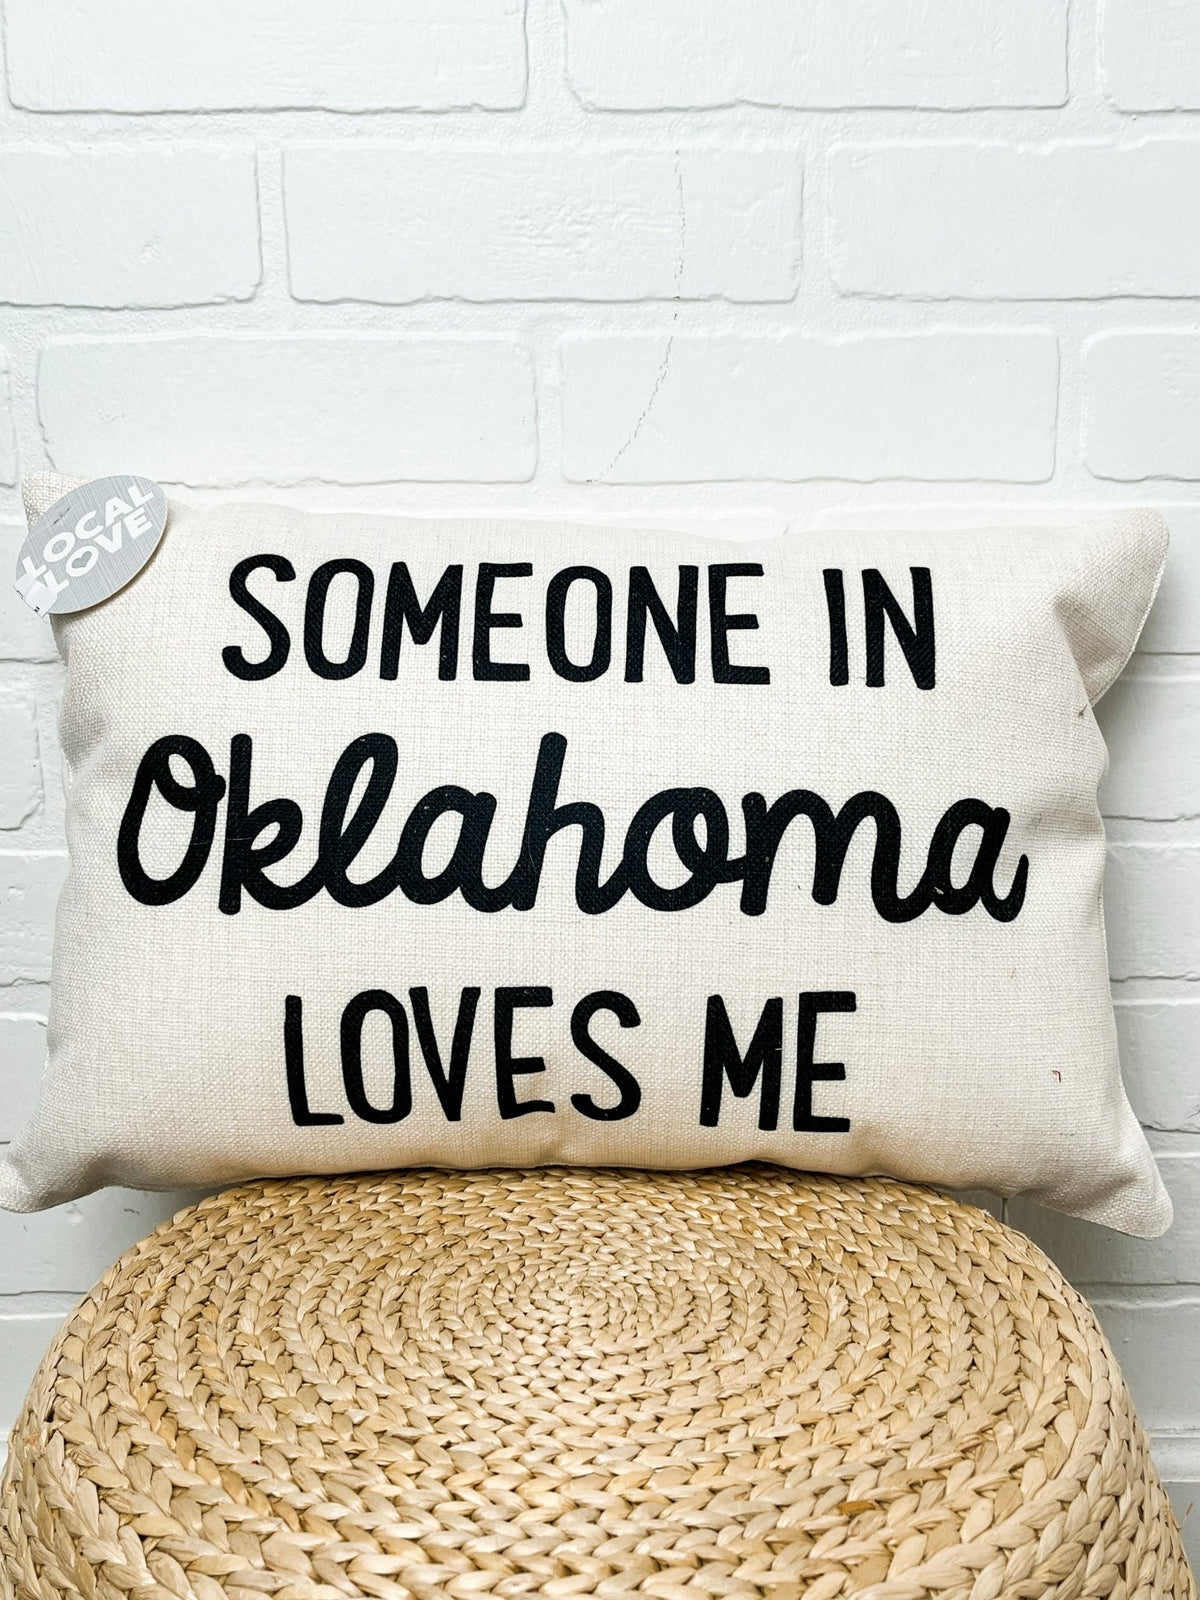 Someone in Oklahoma loves me lumbar pillow - Trendy Gifts at Lush Fashion Lounge Boutique in Oklahoma City